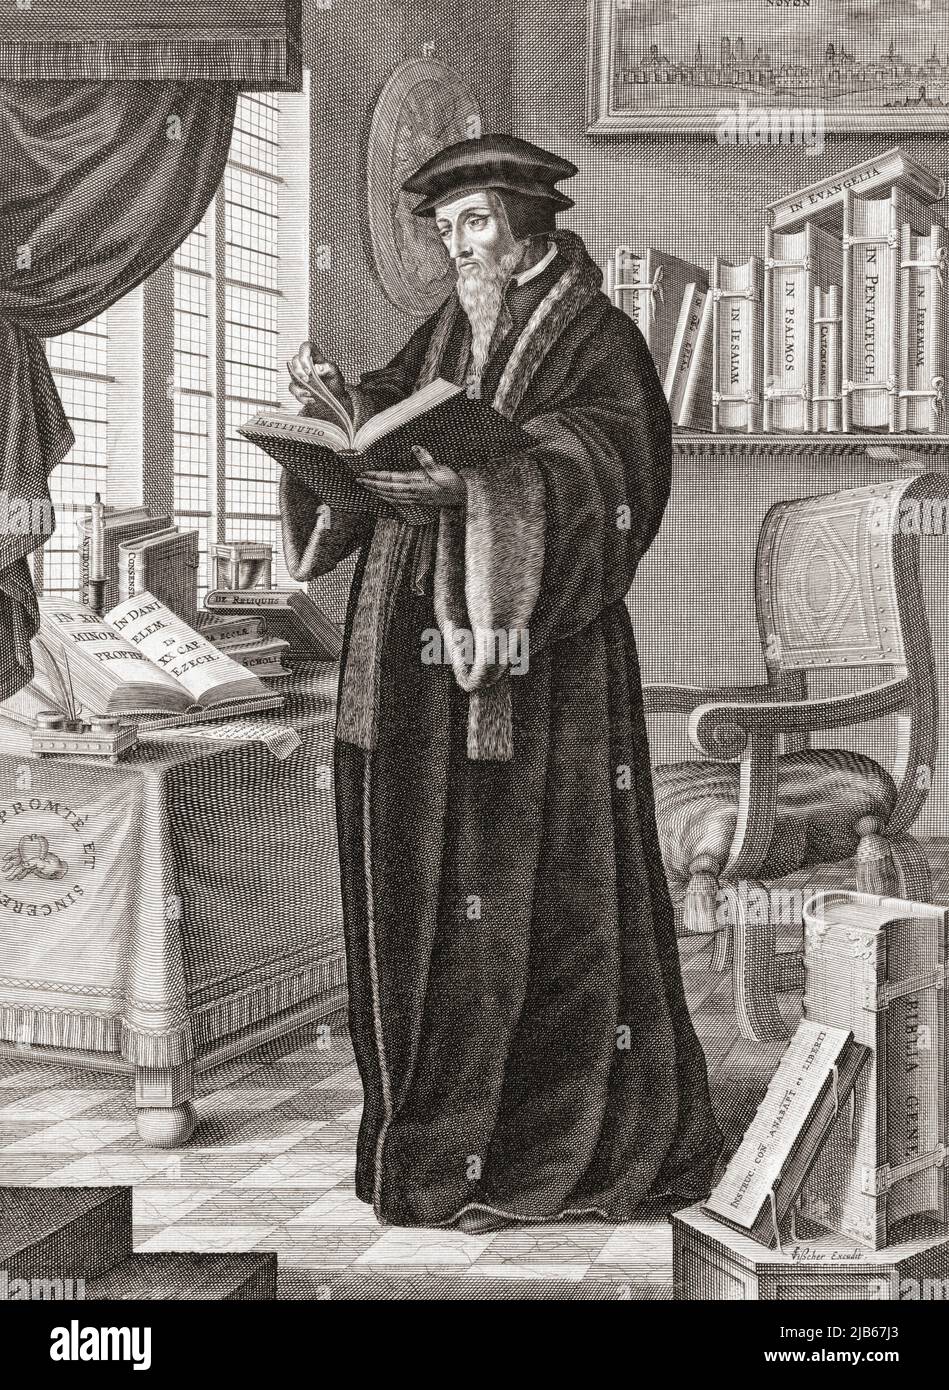 John Calvin, born Jehan Cauvin, 1509 â. “1564. French theologian, pastor and reformer in Geneva during the Protestant Reformation. After a work by Stock Photo